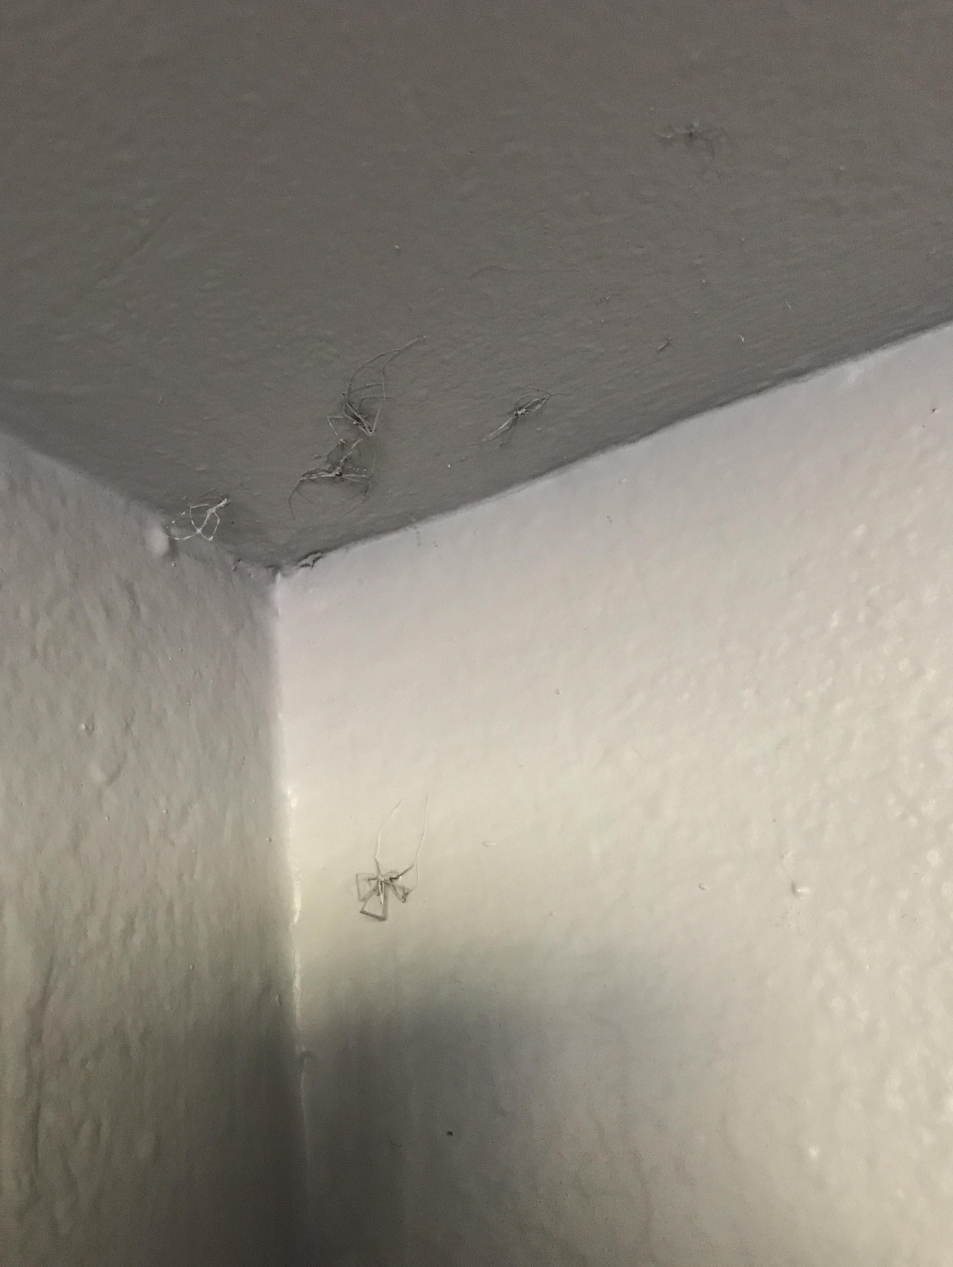 spiders that were painted over